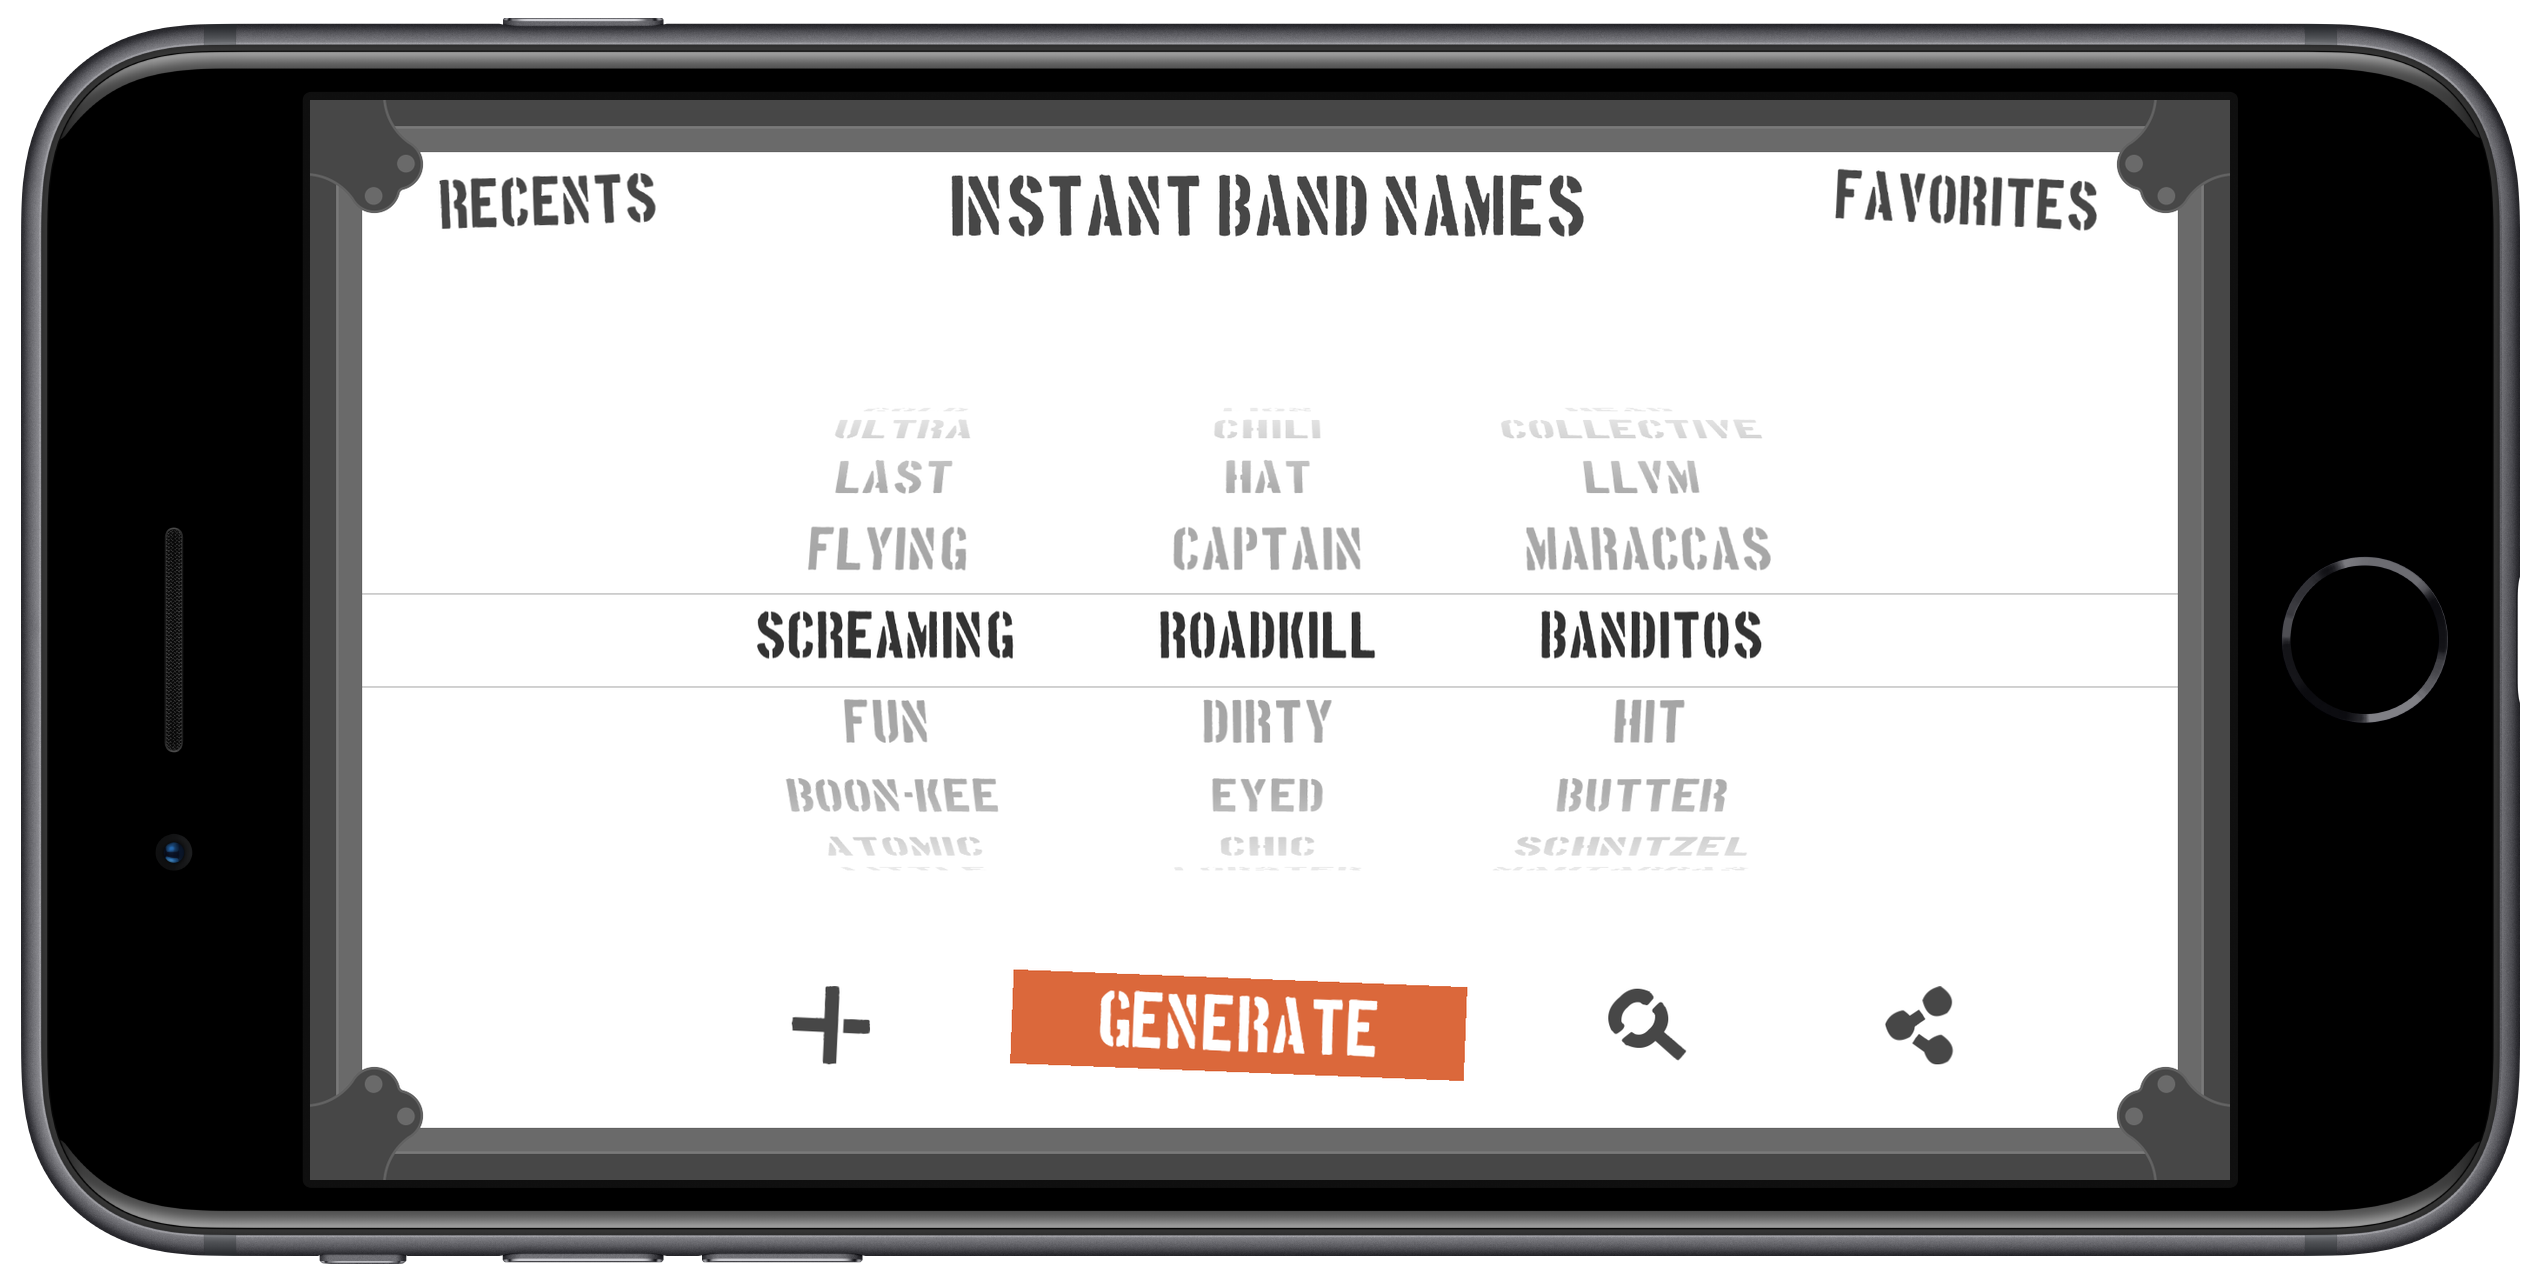 Instant Band Names on a iPhone